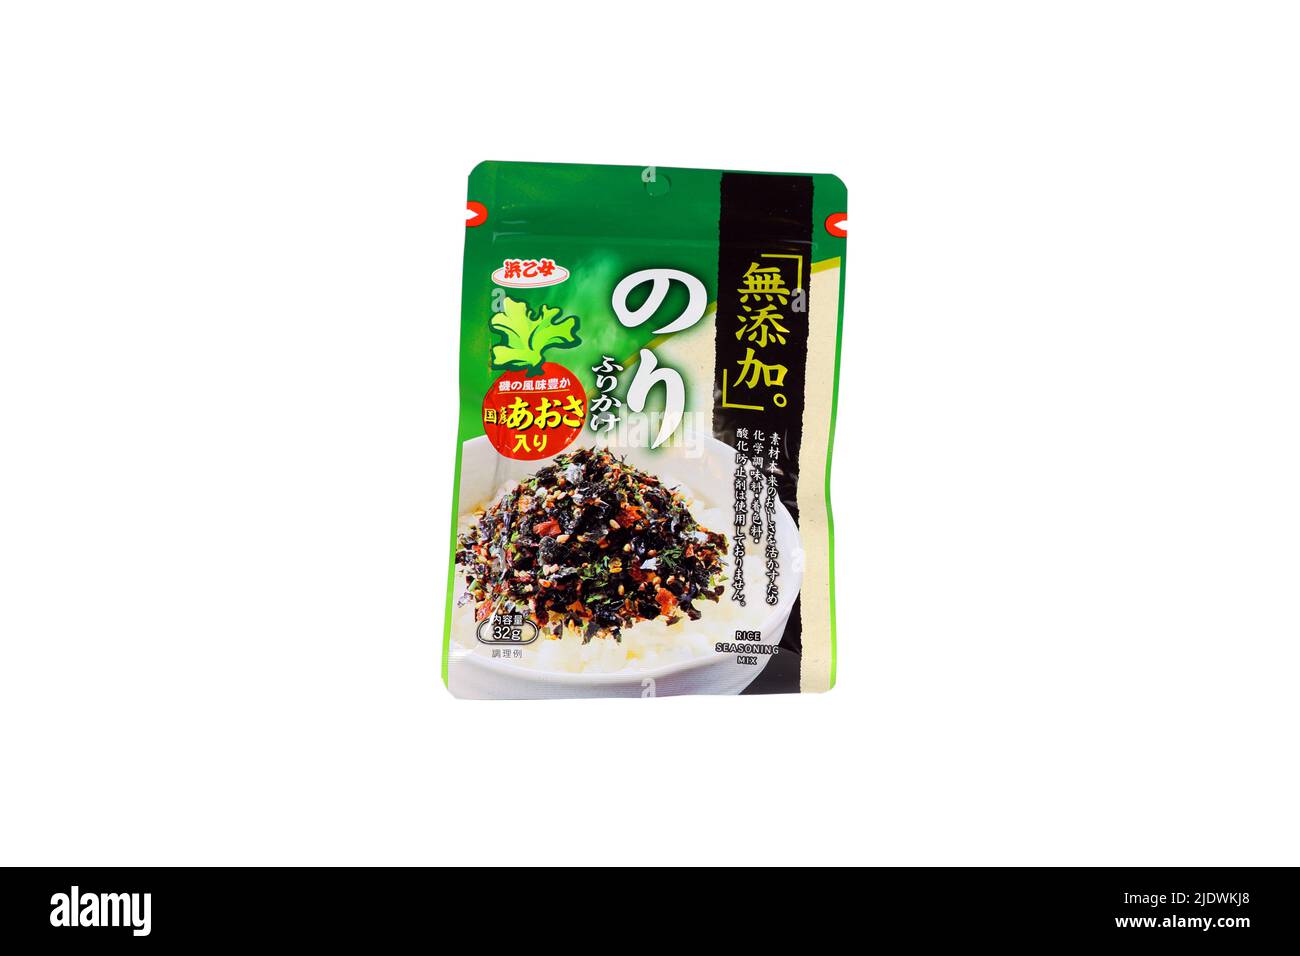 A packet of Hamatome 浜乙女 brand Sea Lettuce Furikake rice seasoning mix isolated on a white background. cutout for illustration and editorial use. Stock Photo